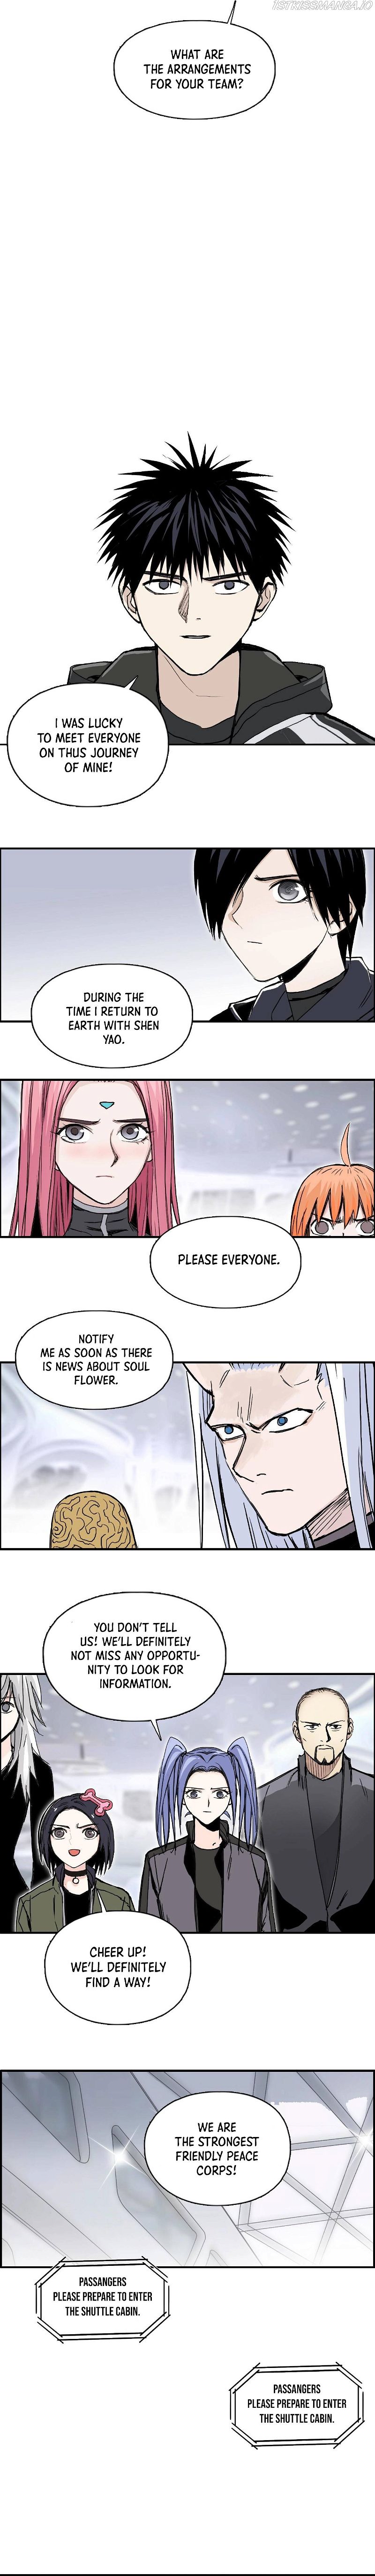 Super Cube Chapter 280 page 5